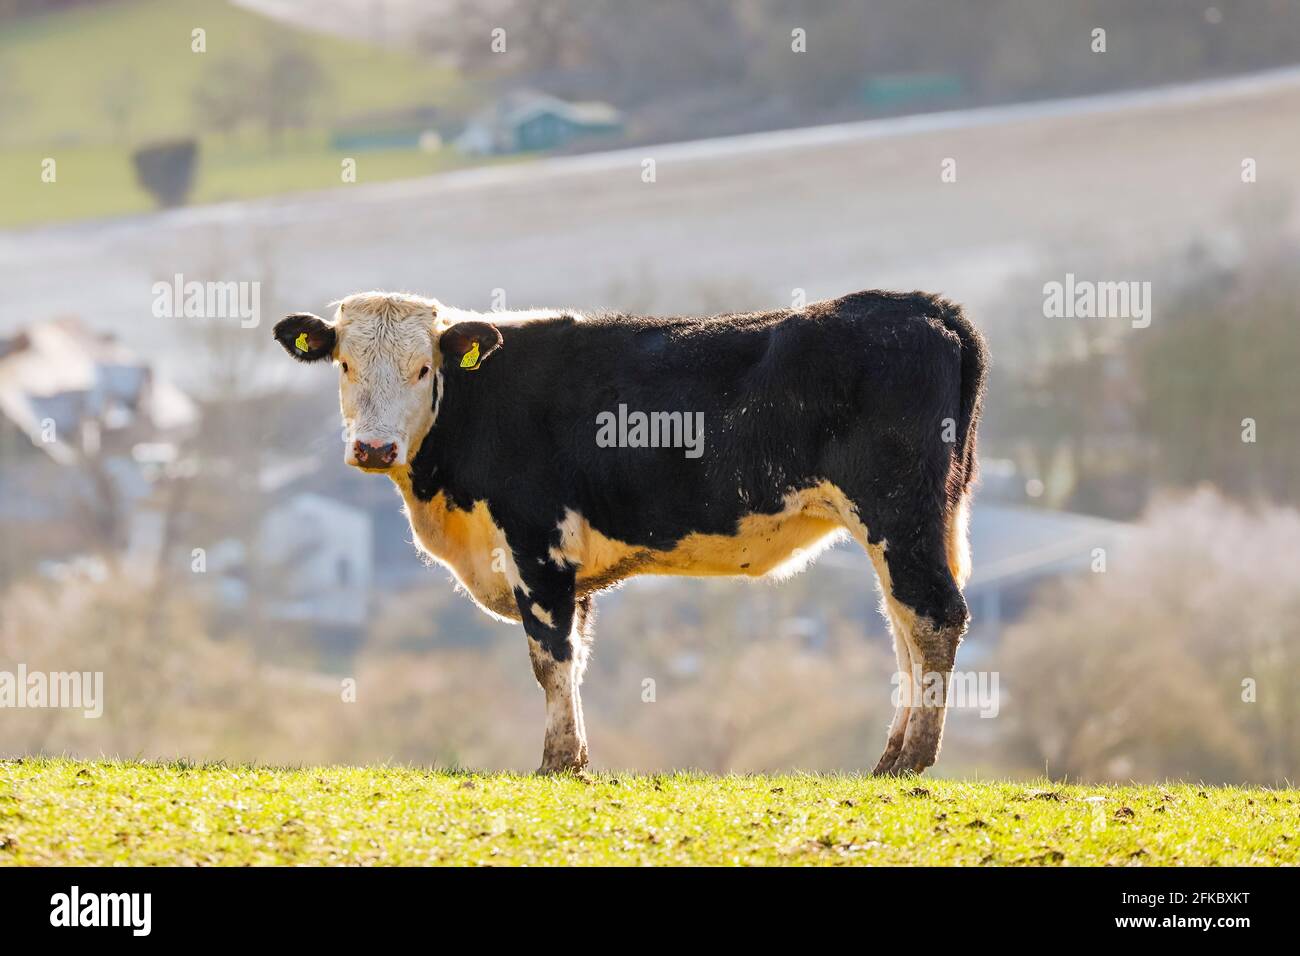 Friesian cow on a hilltop in the Chiltern Hills with the beautiful Stonor Valley beyond, Pishill, Stonor, Oxfordshire, England, United Kingdom, Europe Stock Photo